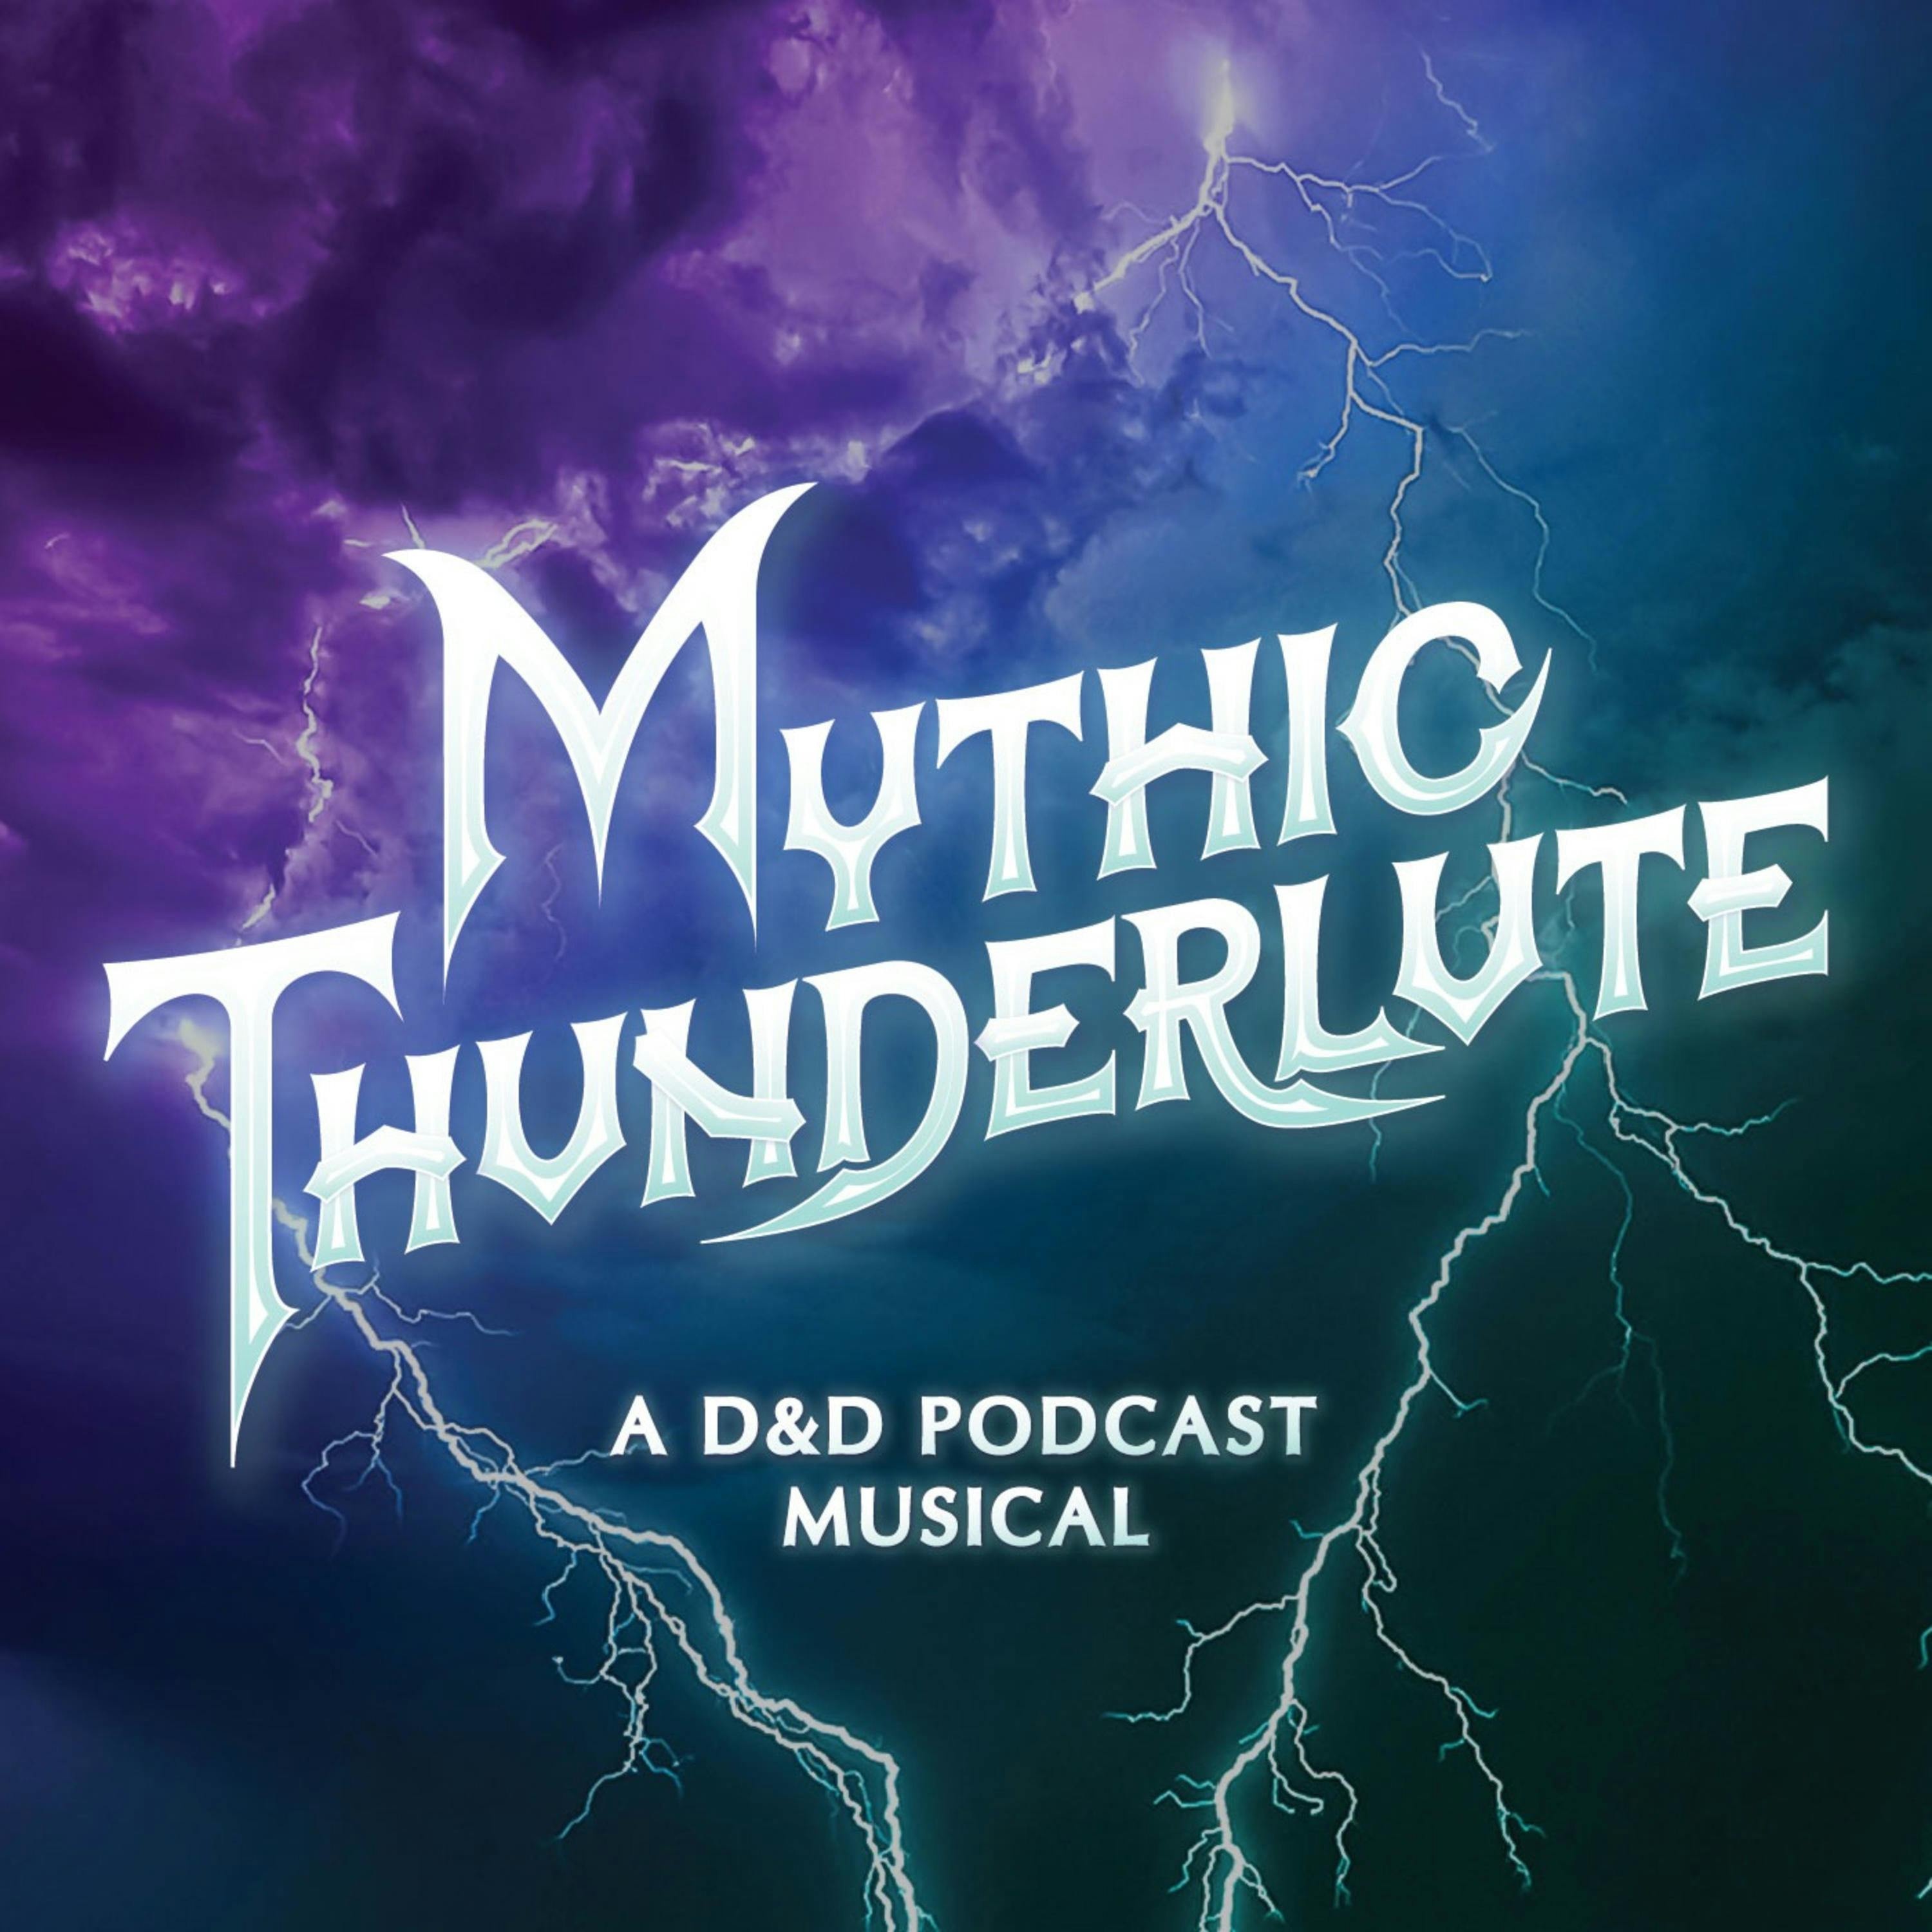 Mythic Thunderlute: A D&D Podcast Musical podcast show image